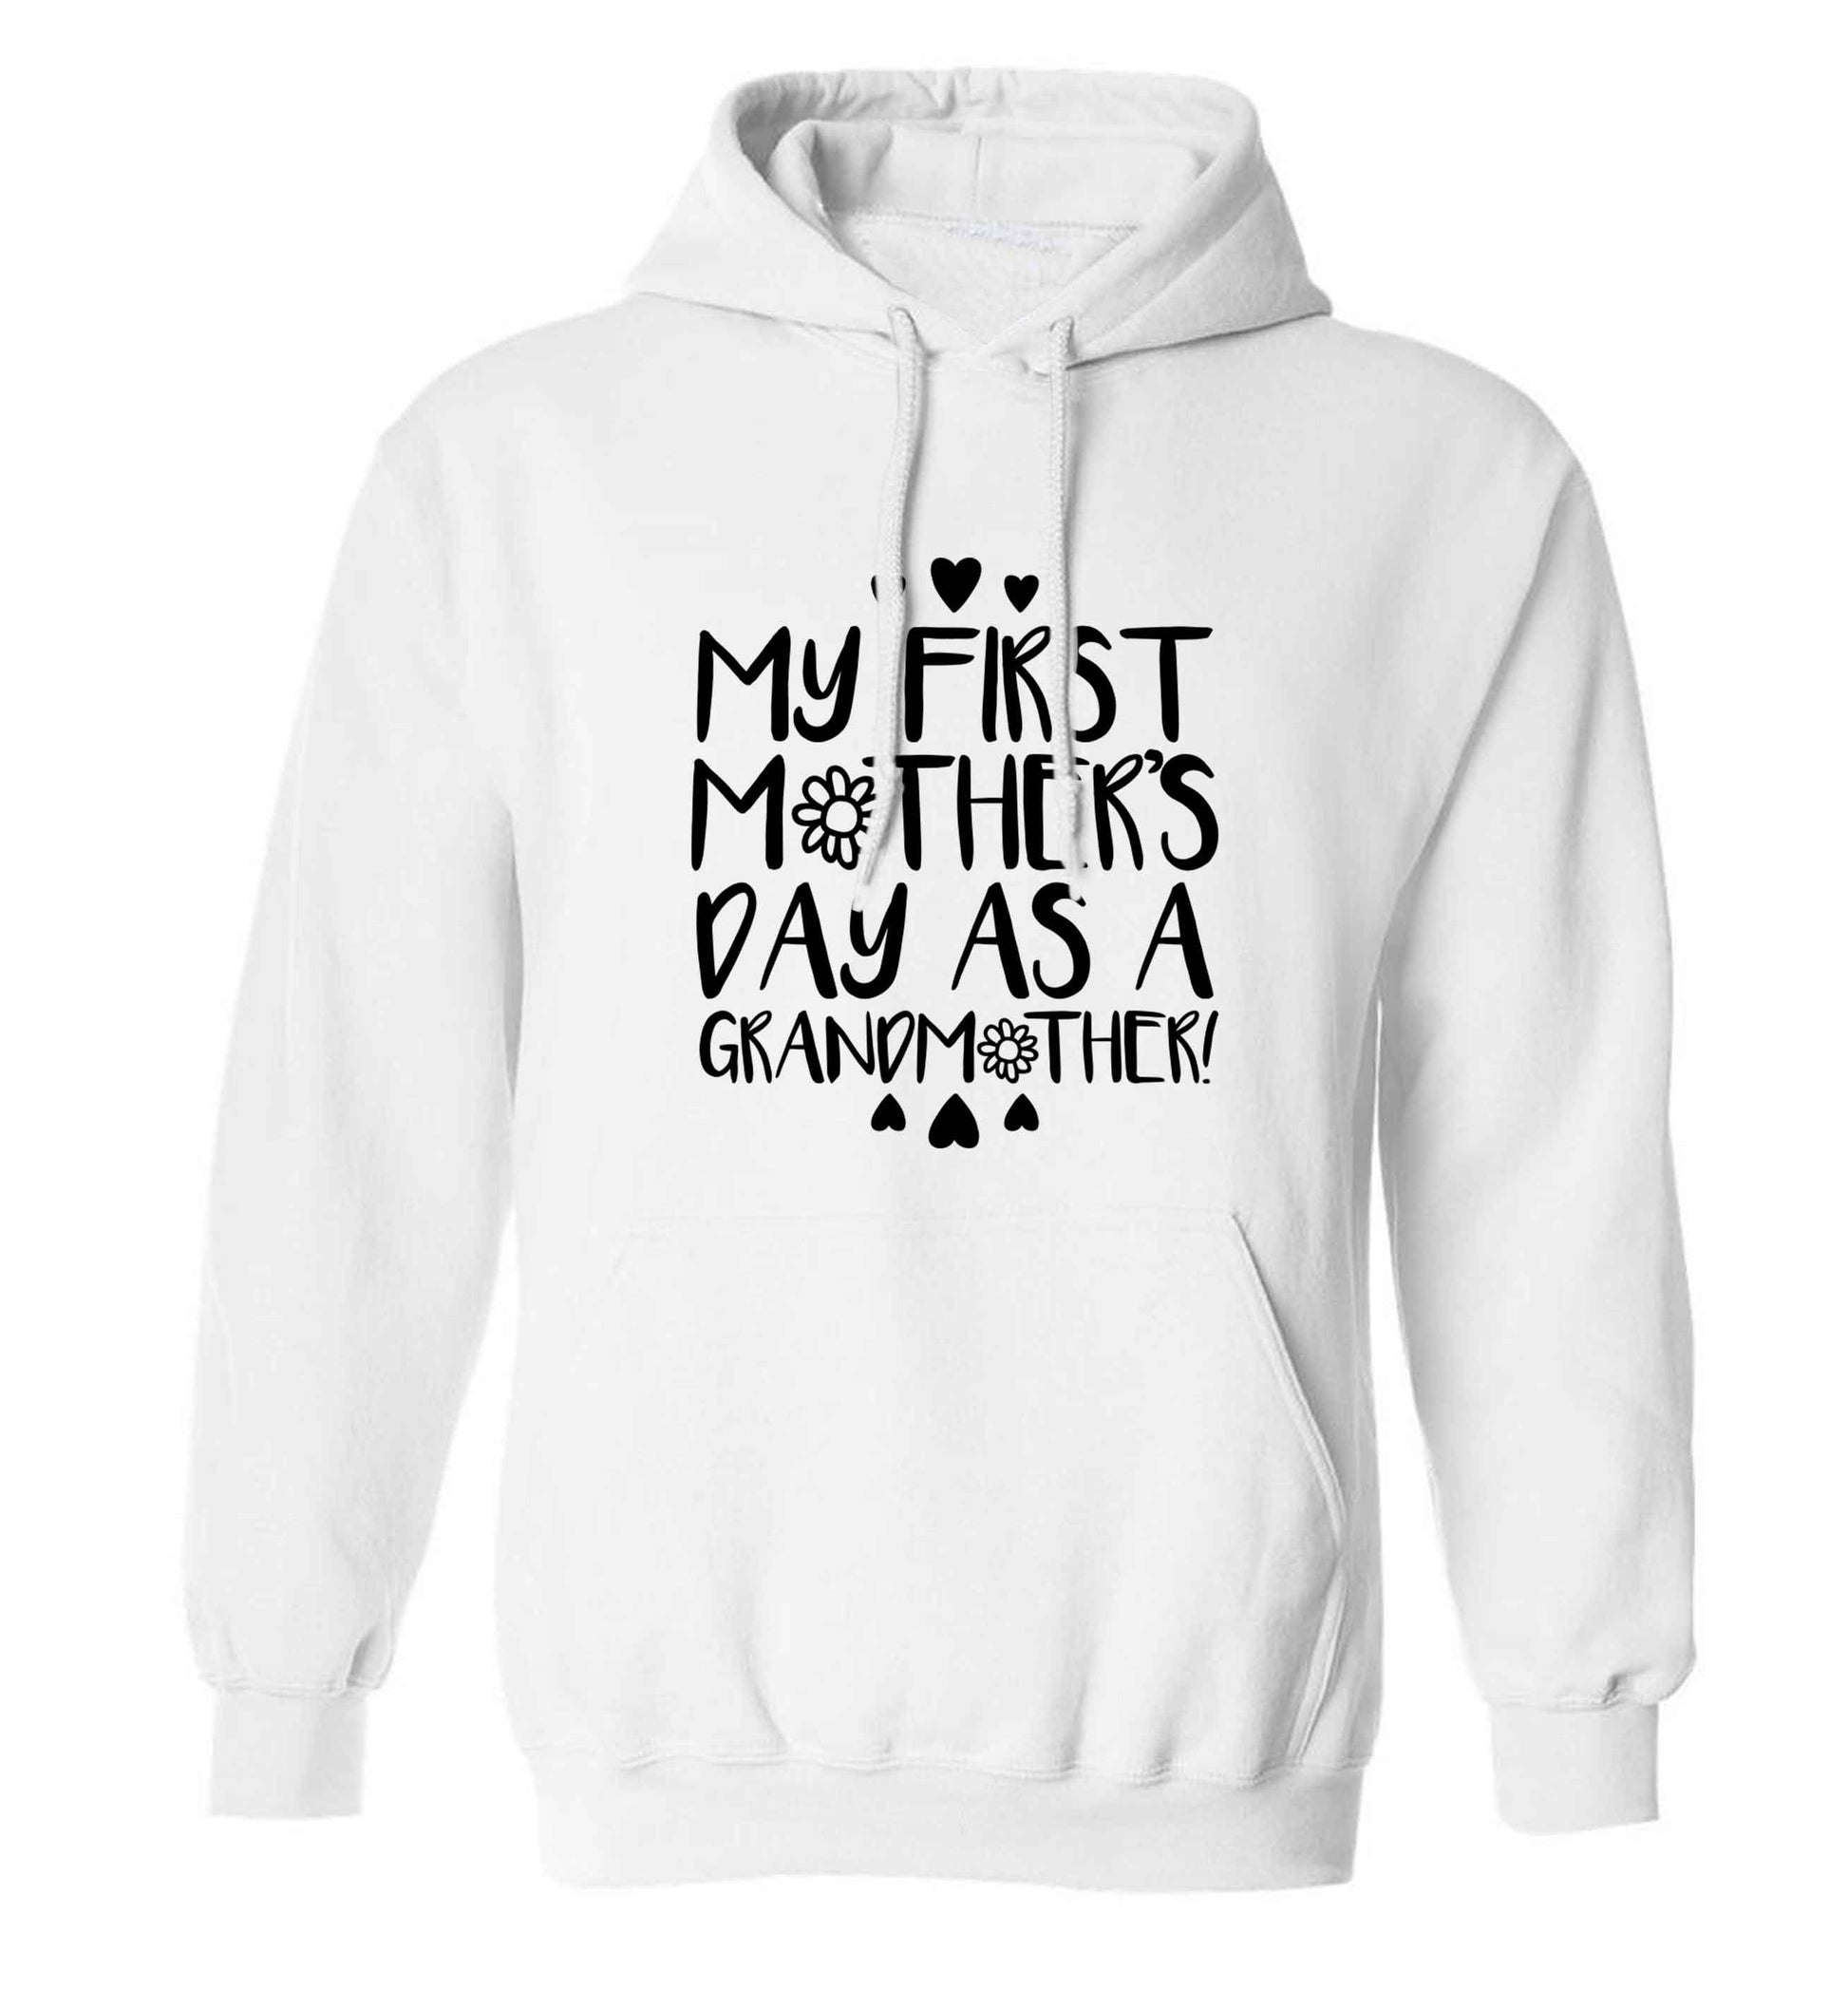 It's my first mother's day as a grandmother adults unisex white hoodie 2XL